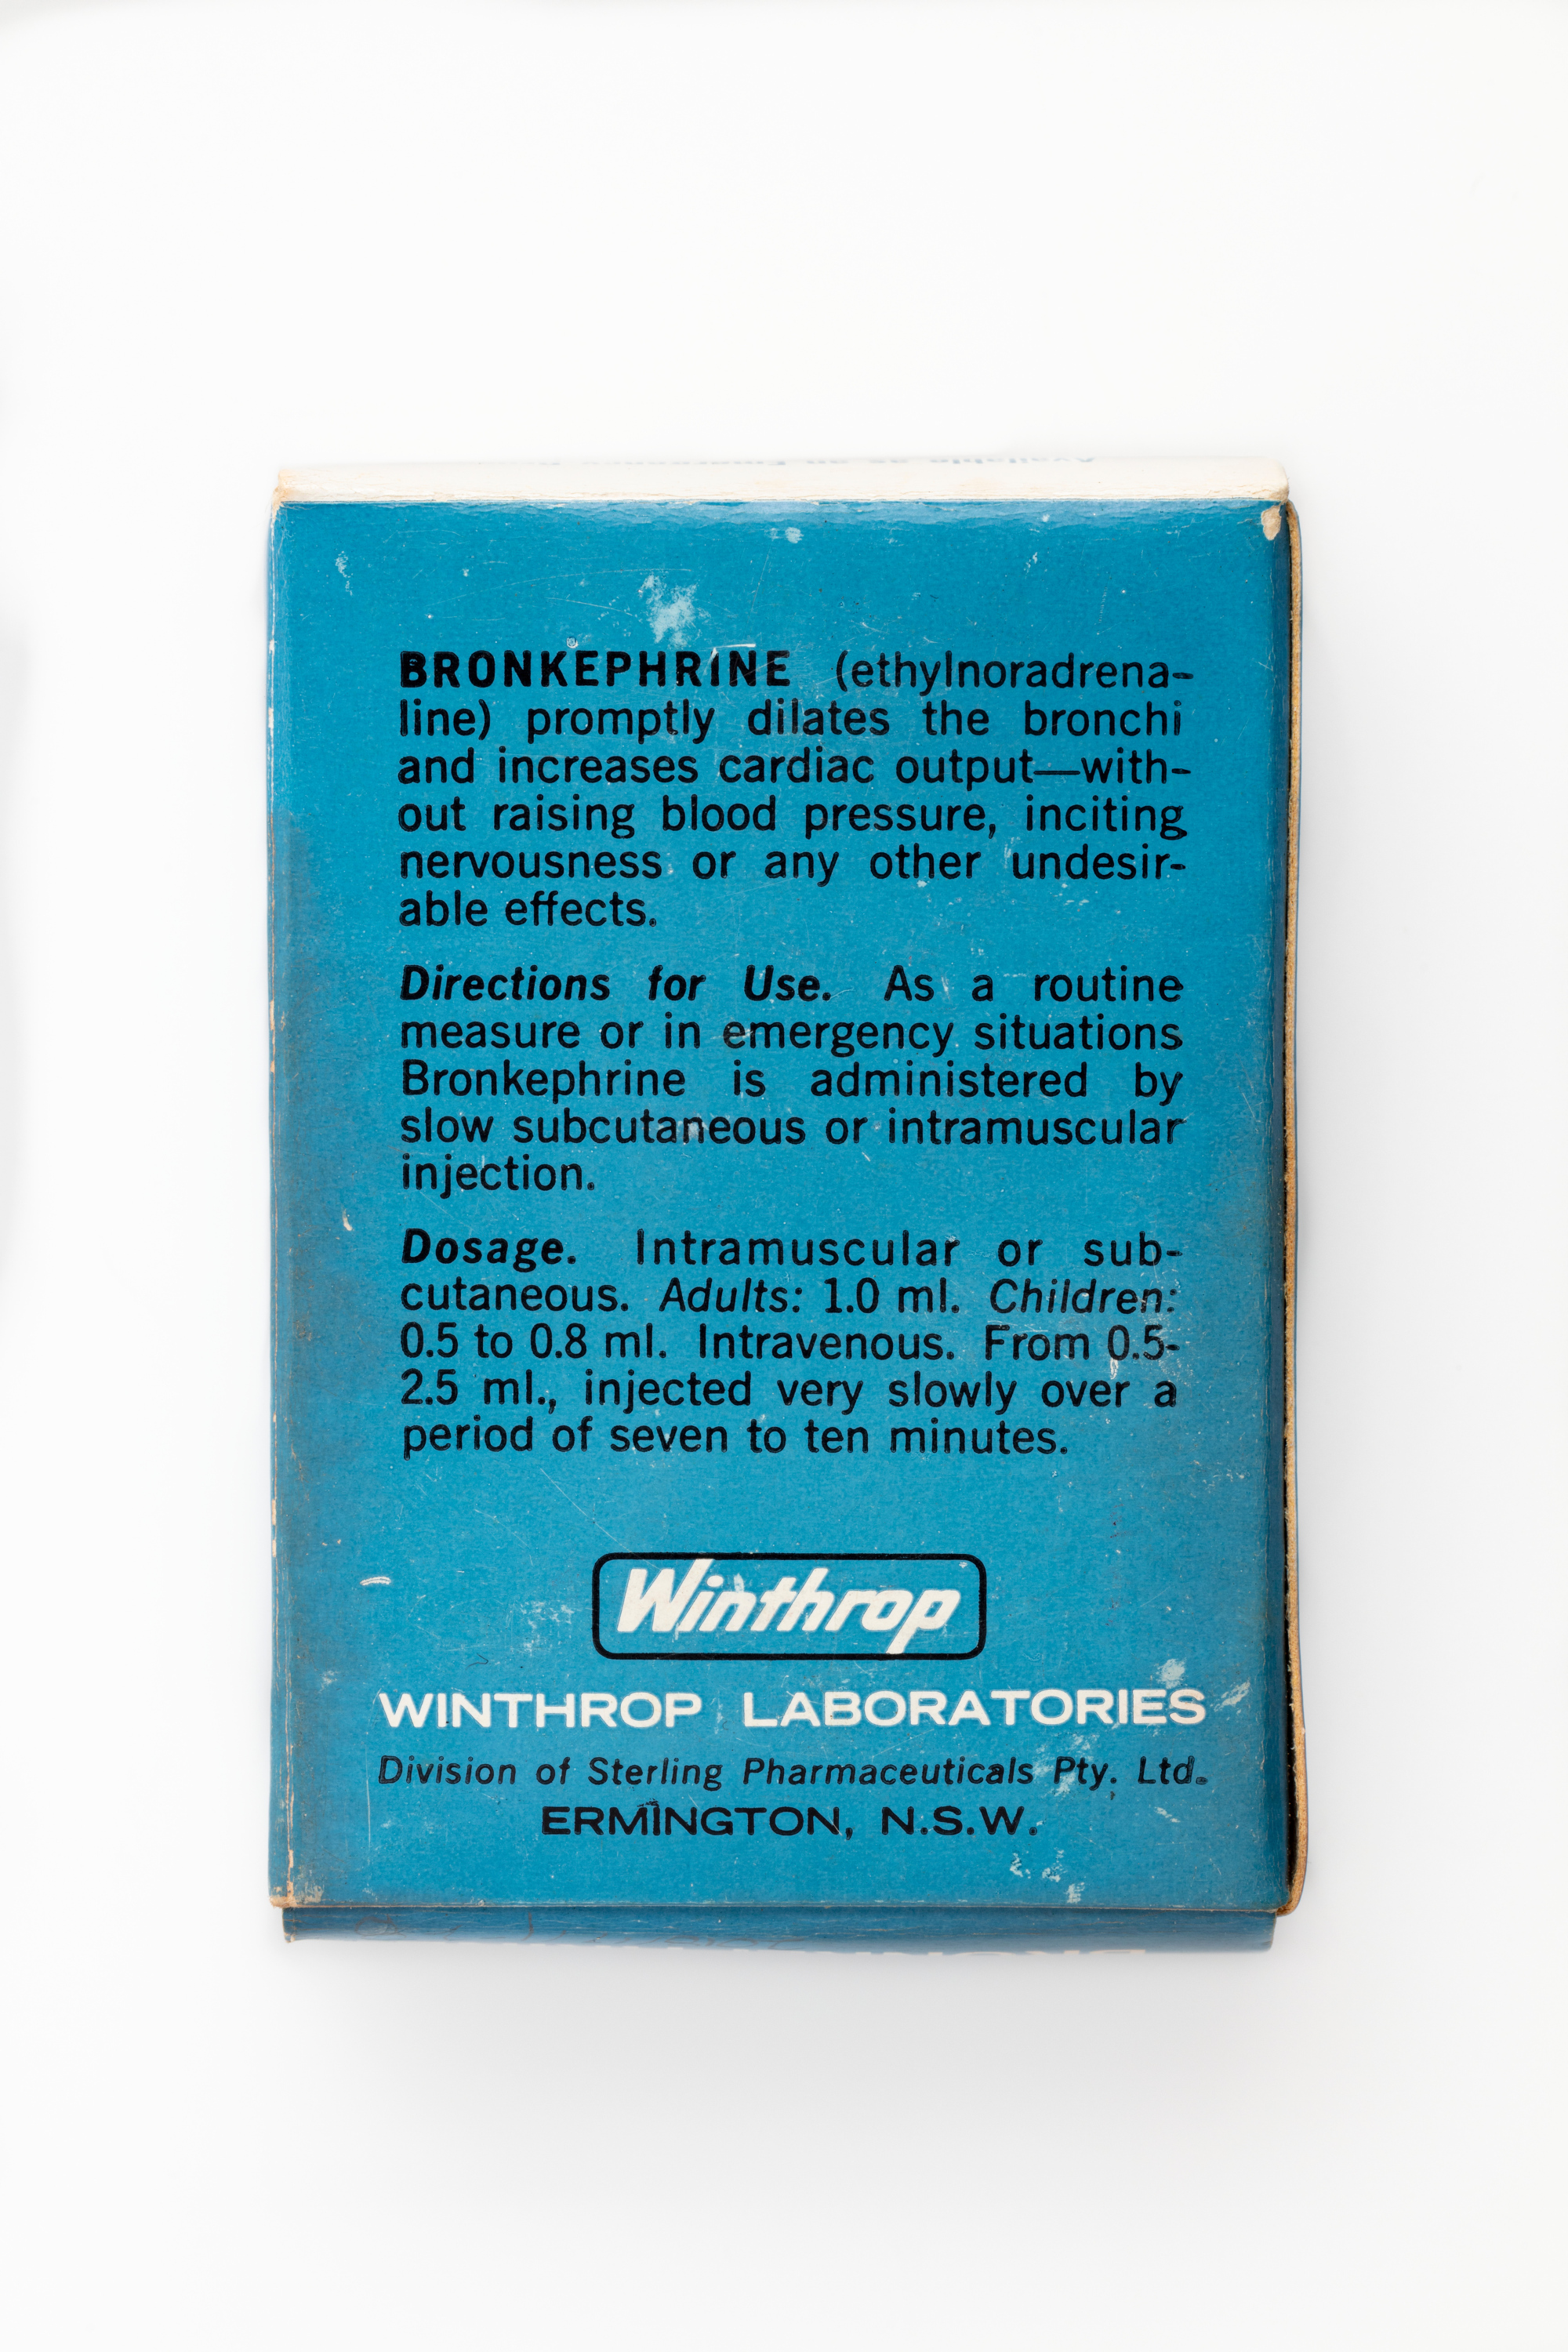 Vials of Bronkephrine made by Winthrop Laboratories